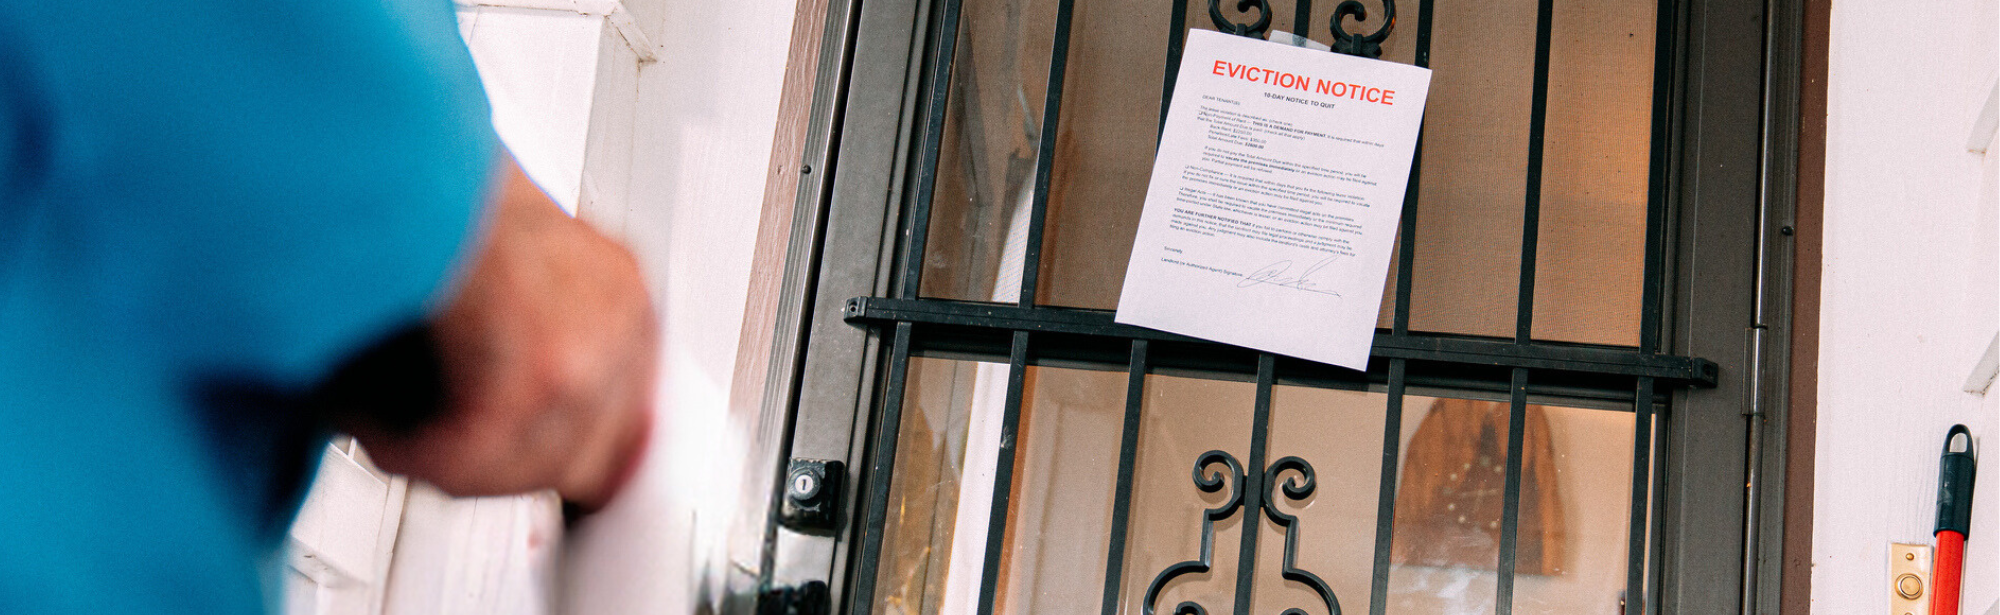 Person approaches their home and sees an eviction notice taped to the door